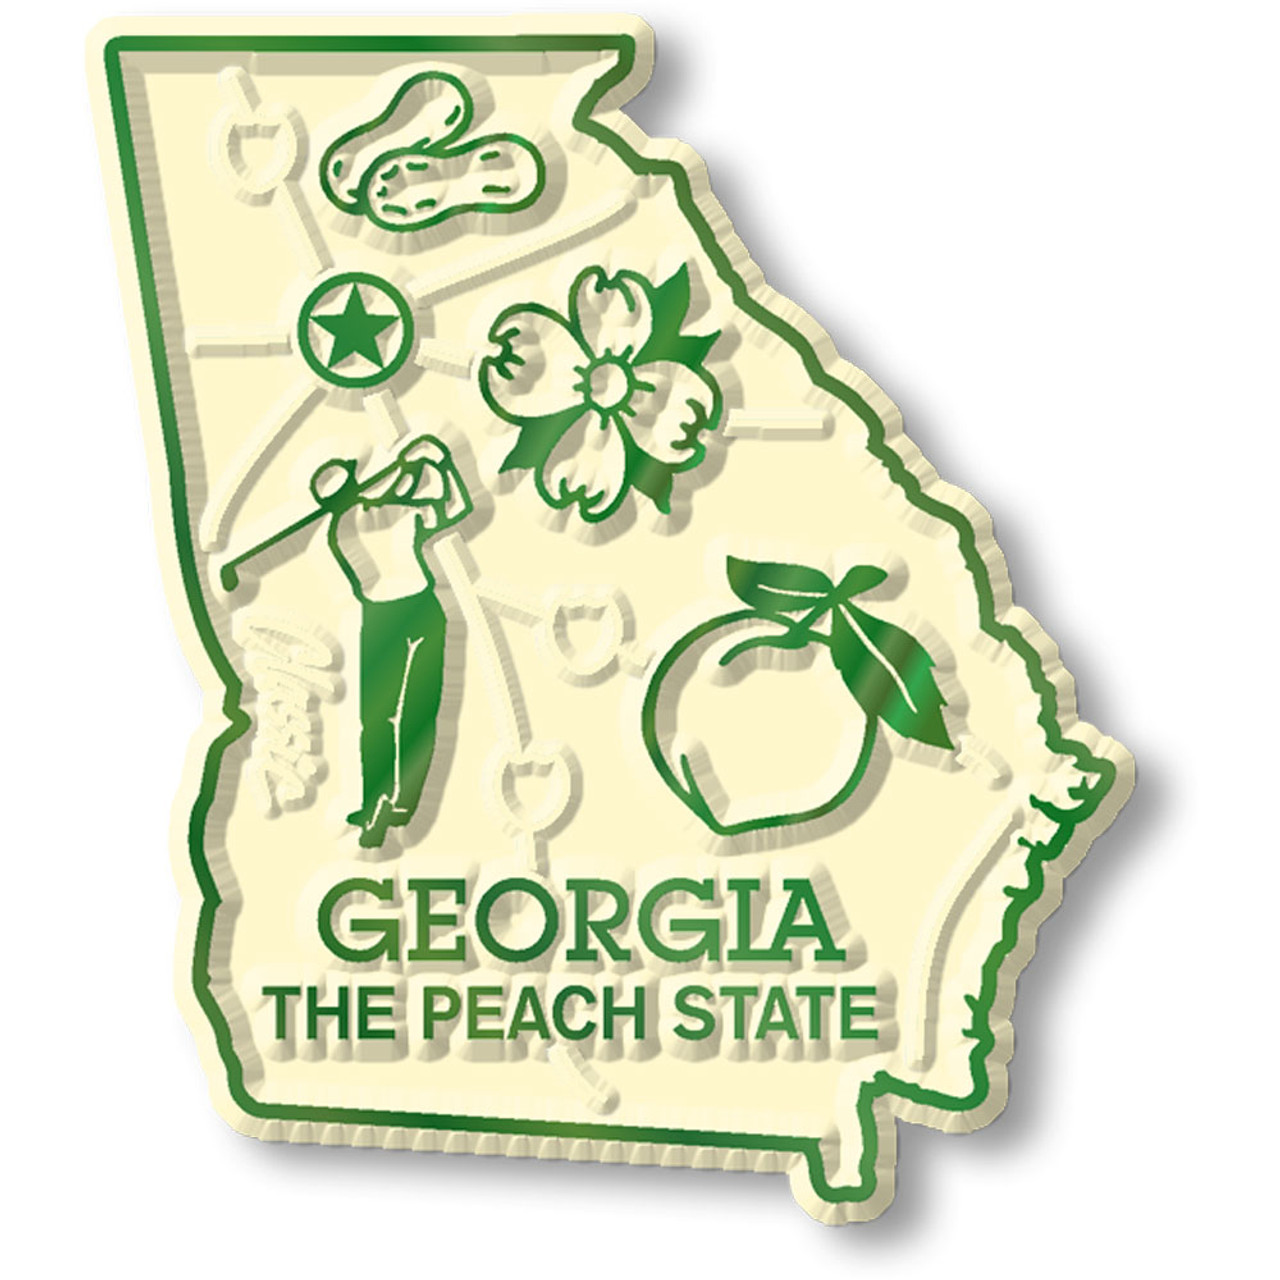 Georgia Jumbo State Magnet by Classic Magnets, Collectible Souvenirs Made in The USA